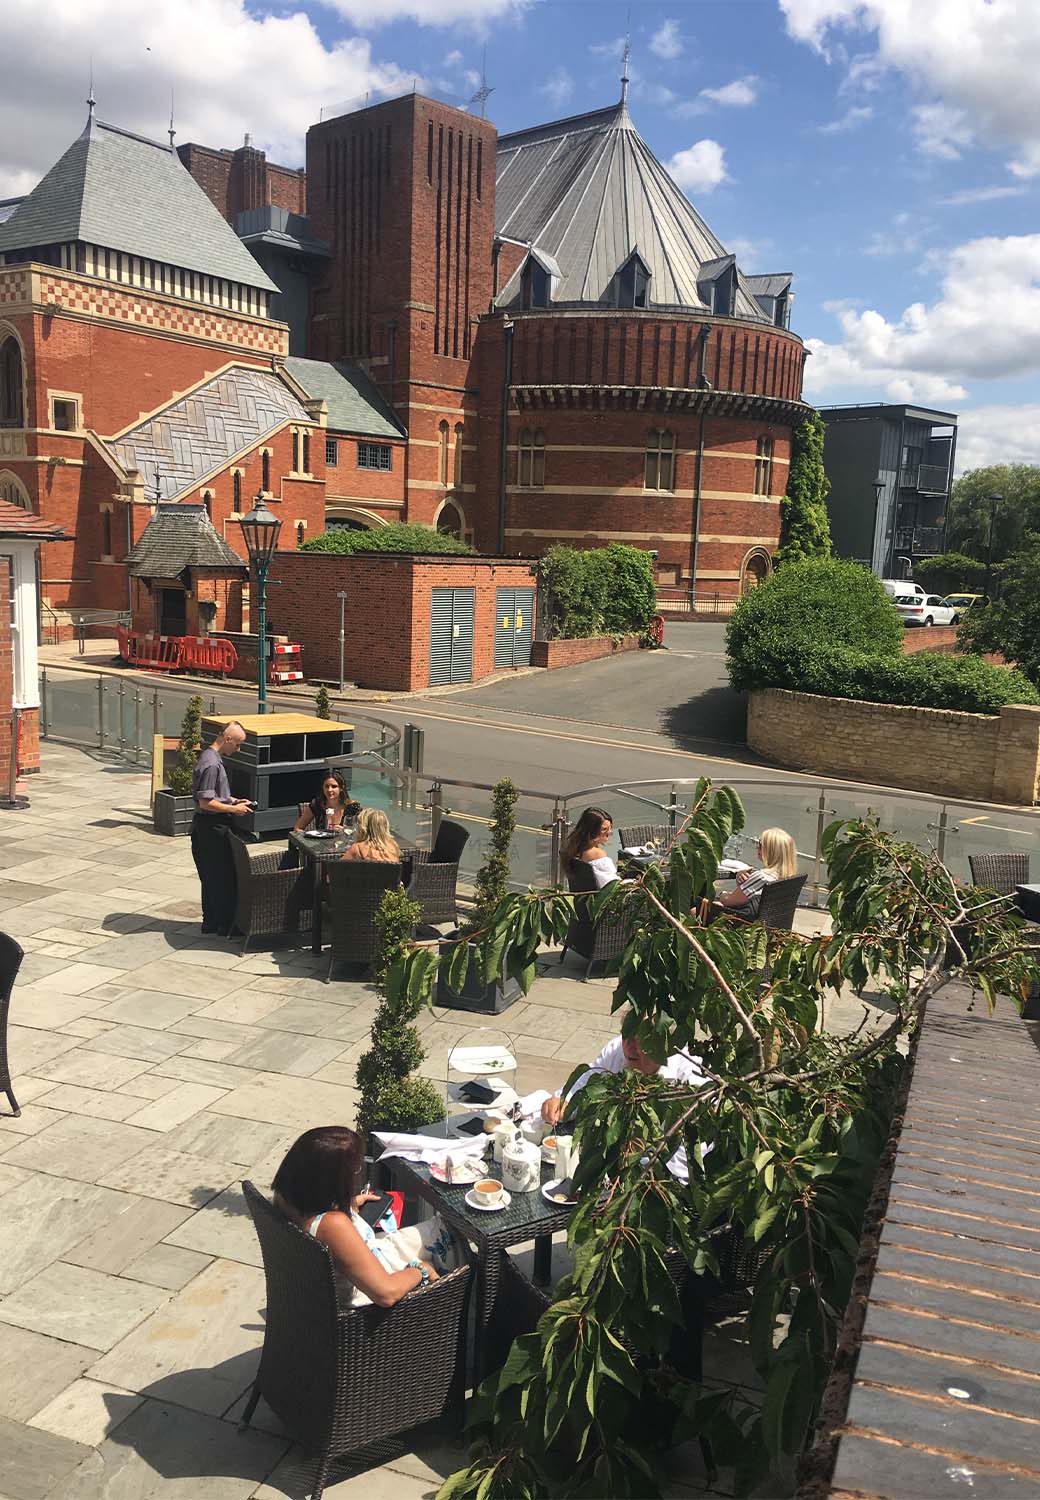 outdoor dining in stratford upon avon